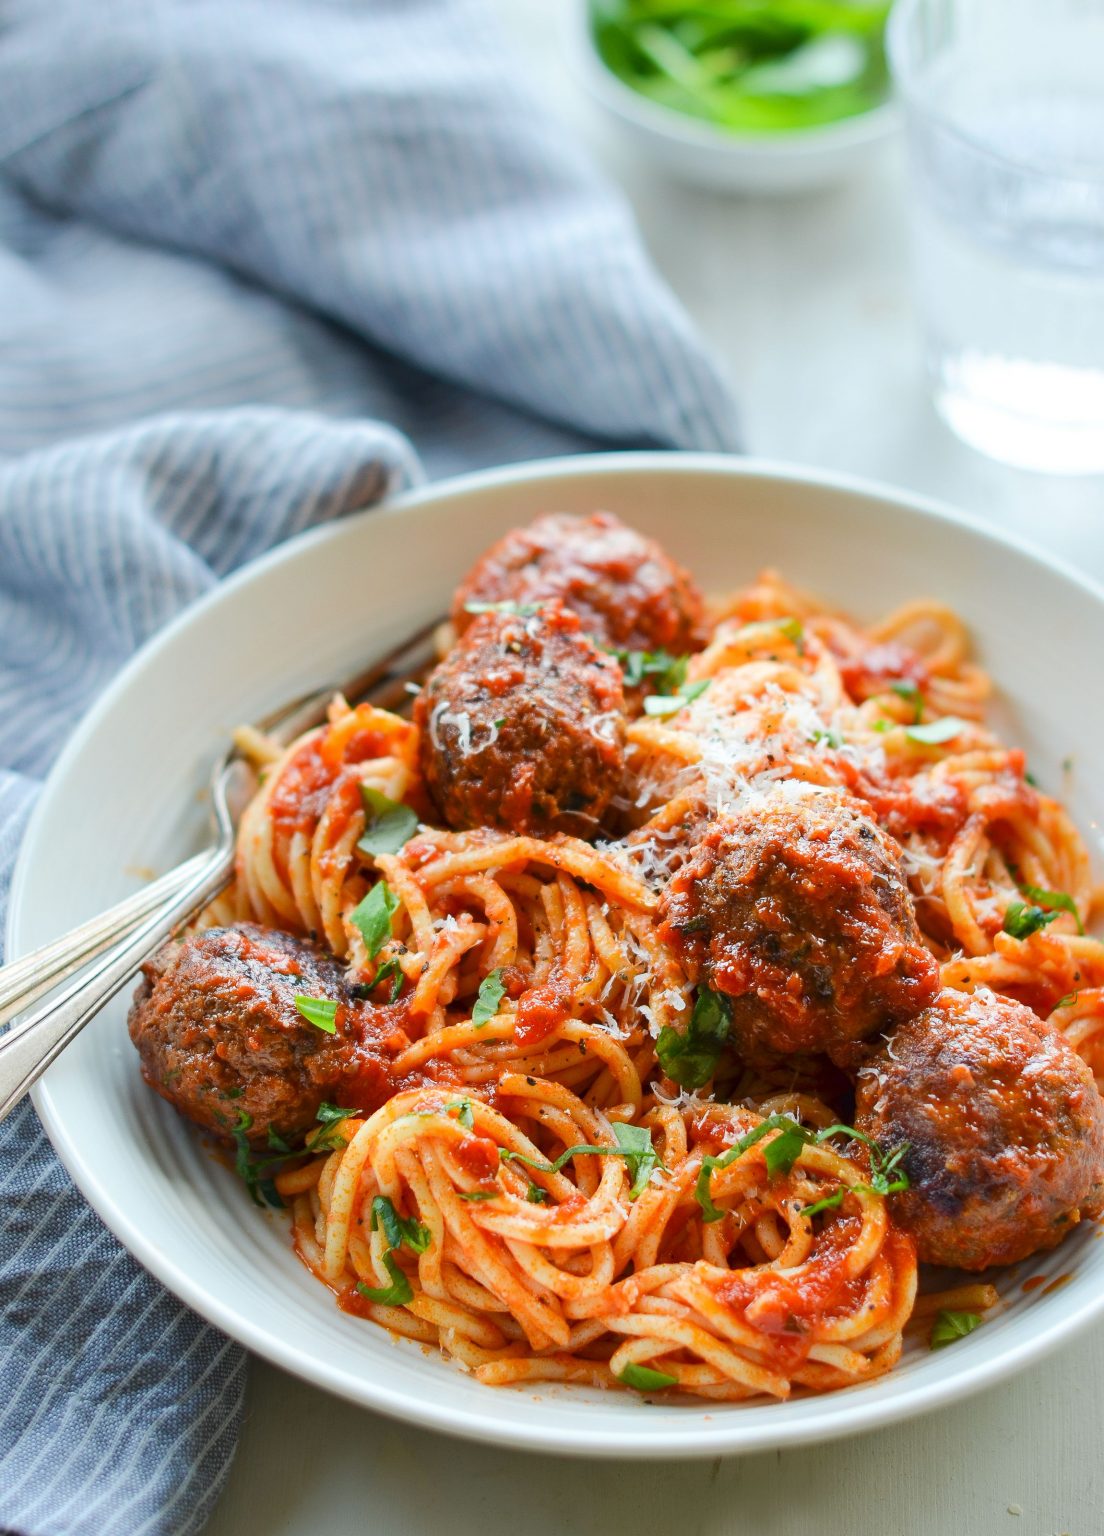 Spicy Spaghetti And Meatballs Recipe | Infoanthemz food & recipes